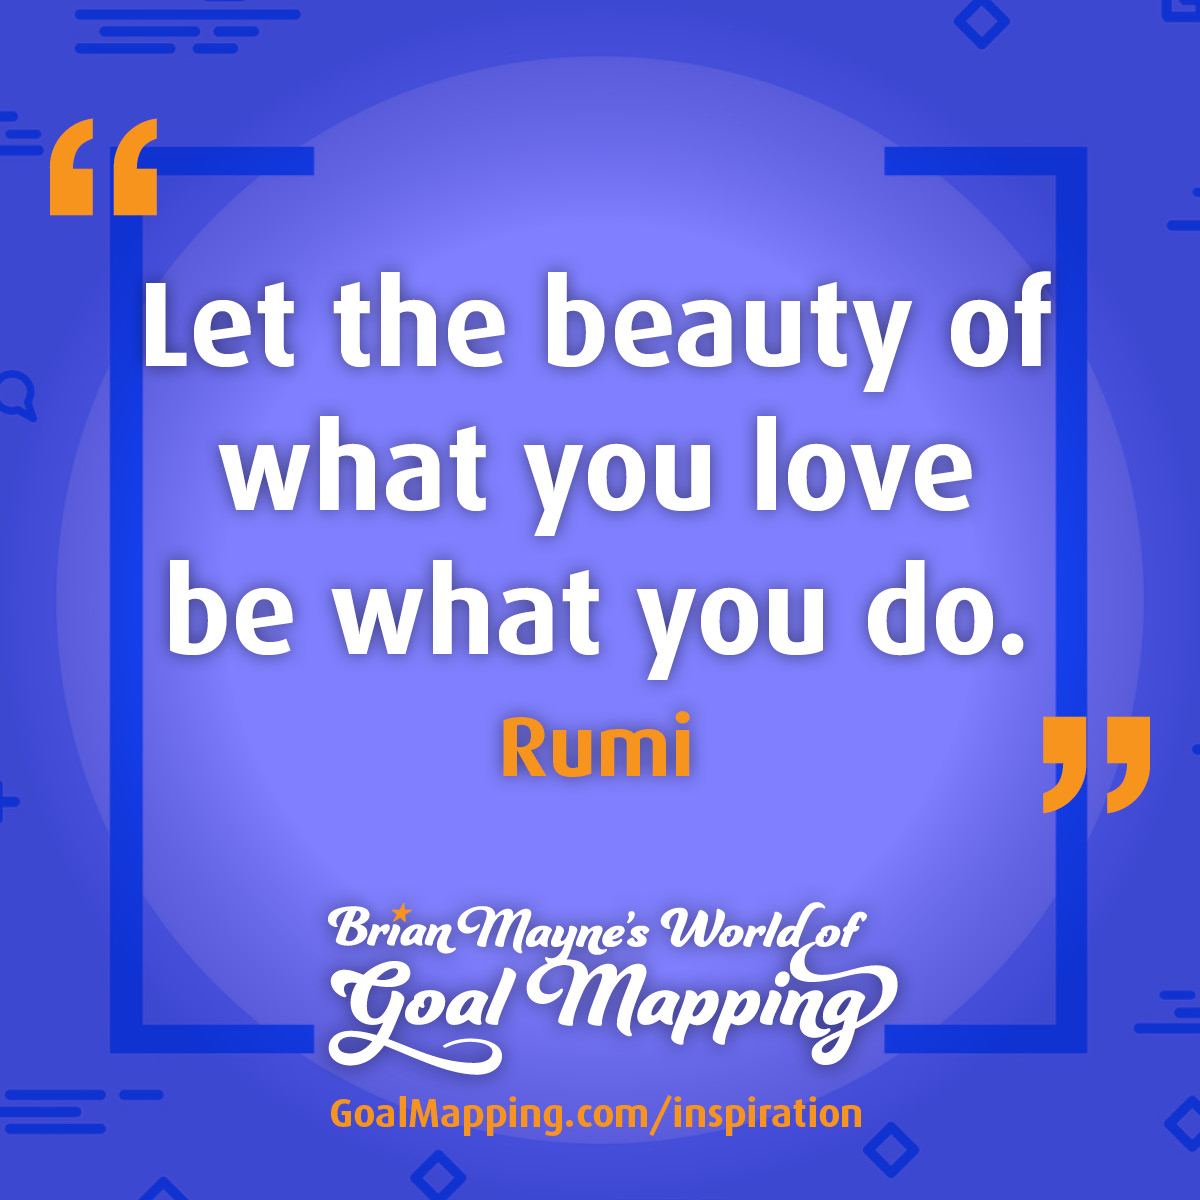 "Let the beauty of what you love be what you do." Rumi